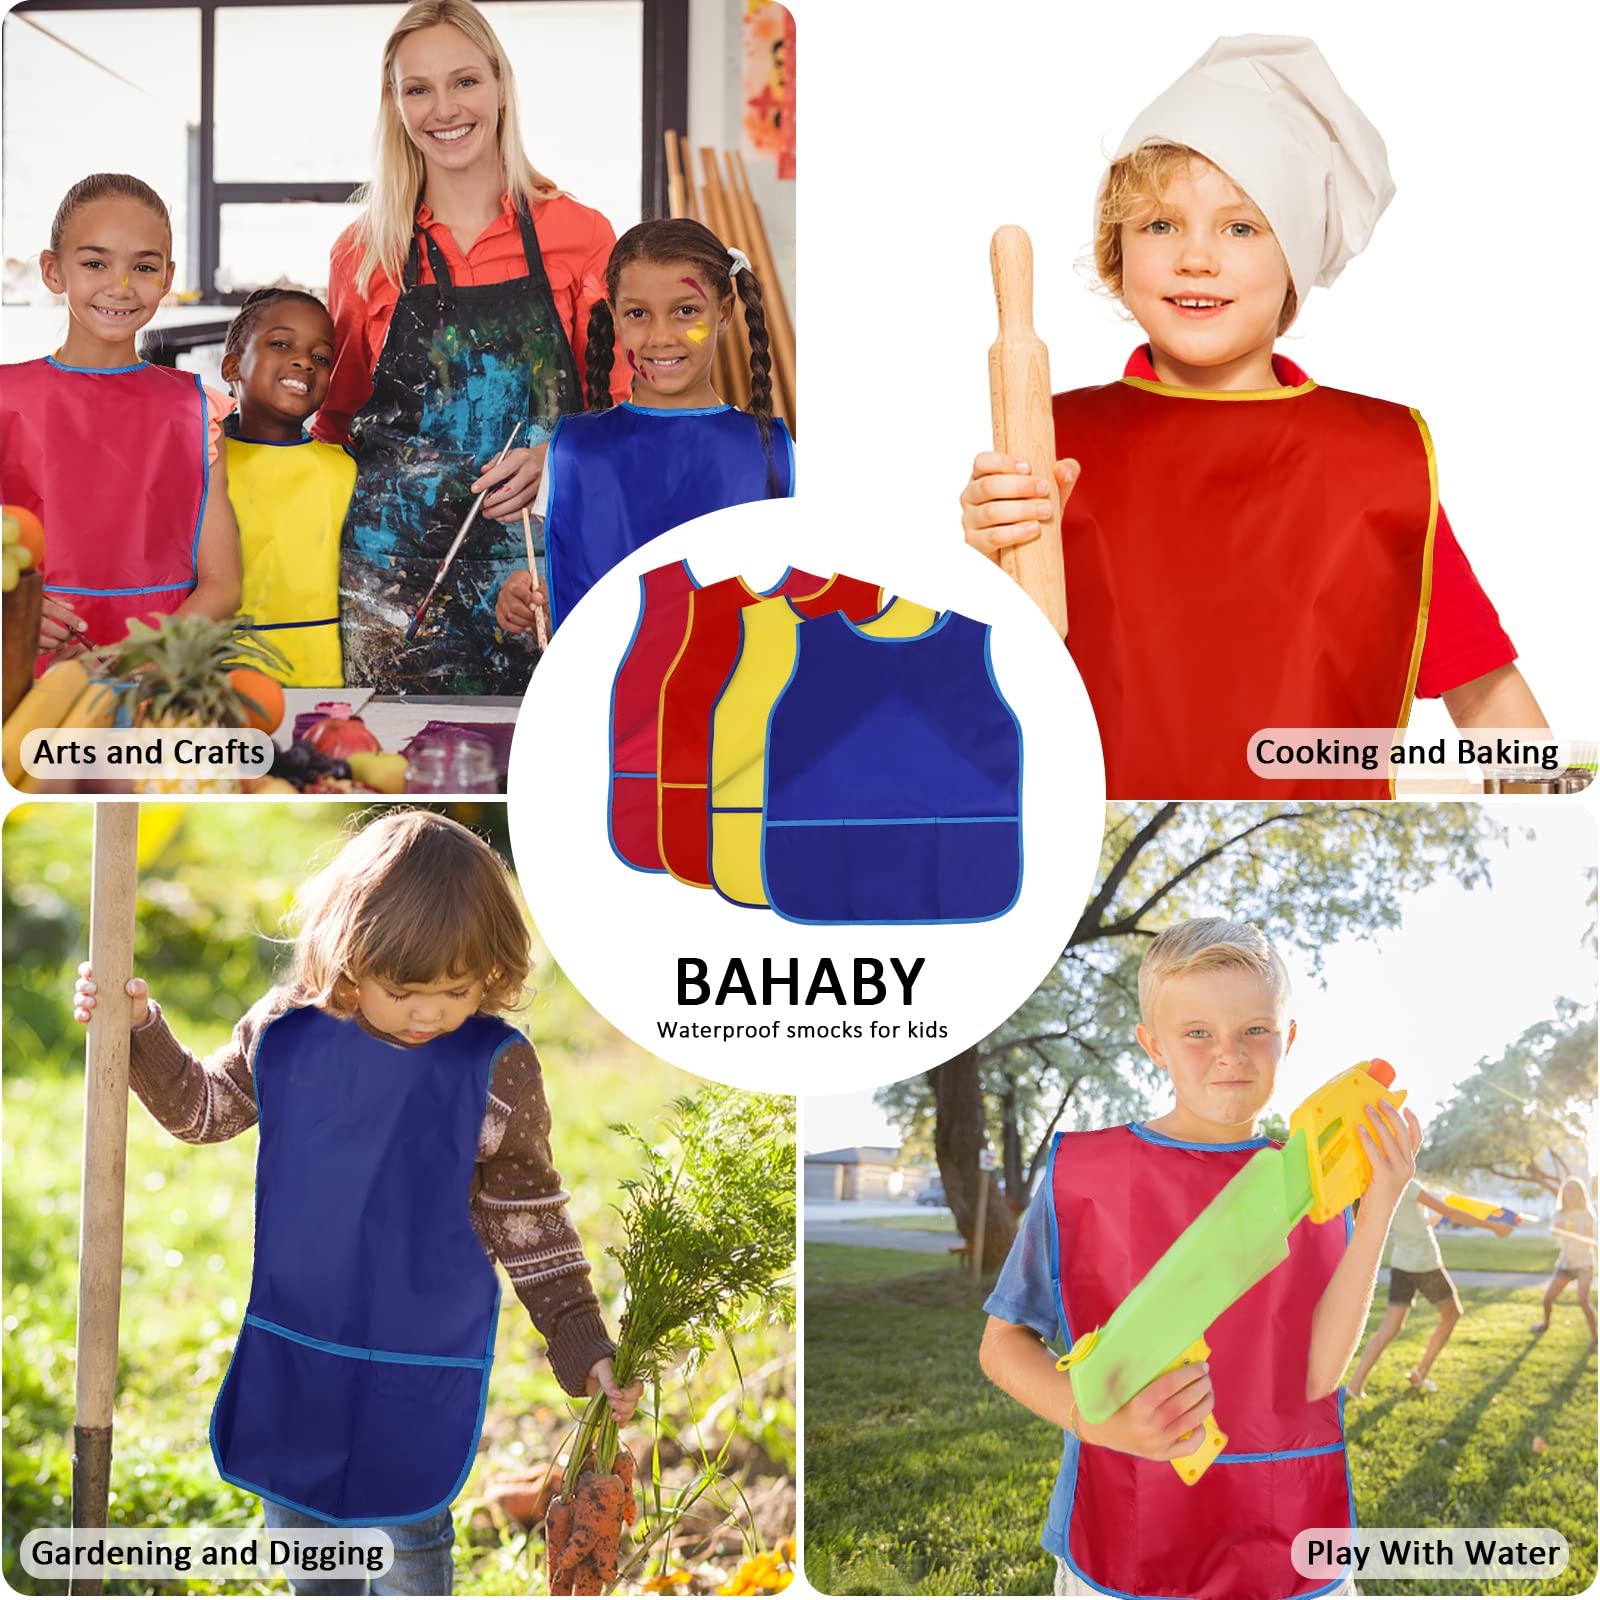 BAHABY 4 Pieces Kids Art Smock Kids Apron Waterproof Painting Aprons with Pockets Art Smocks for Kids 3-8 Years, 4 Colors